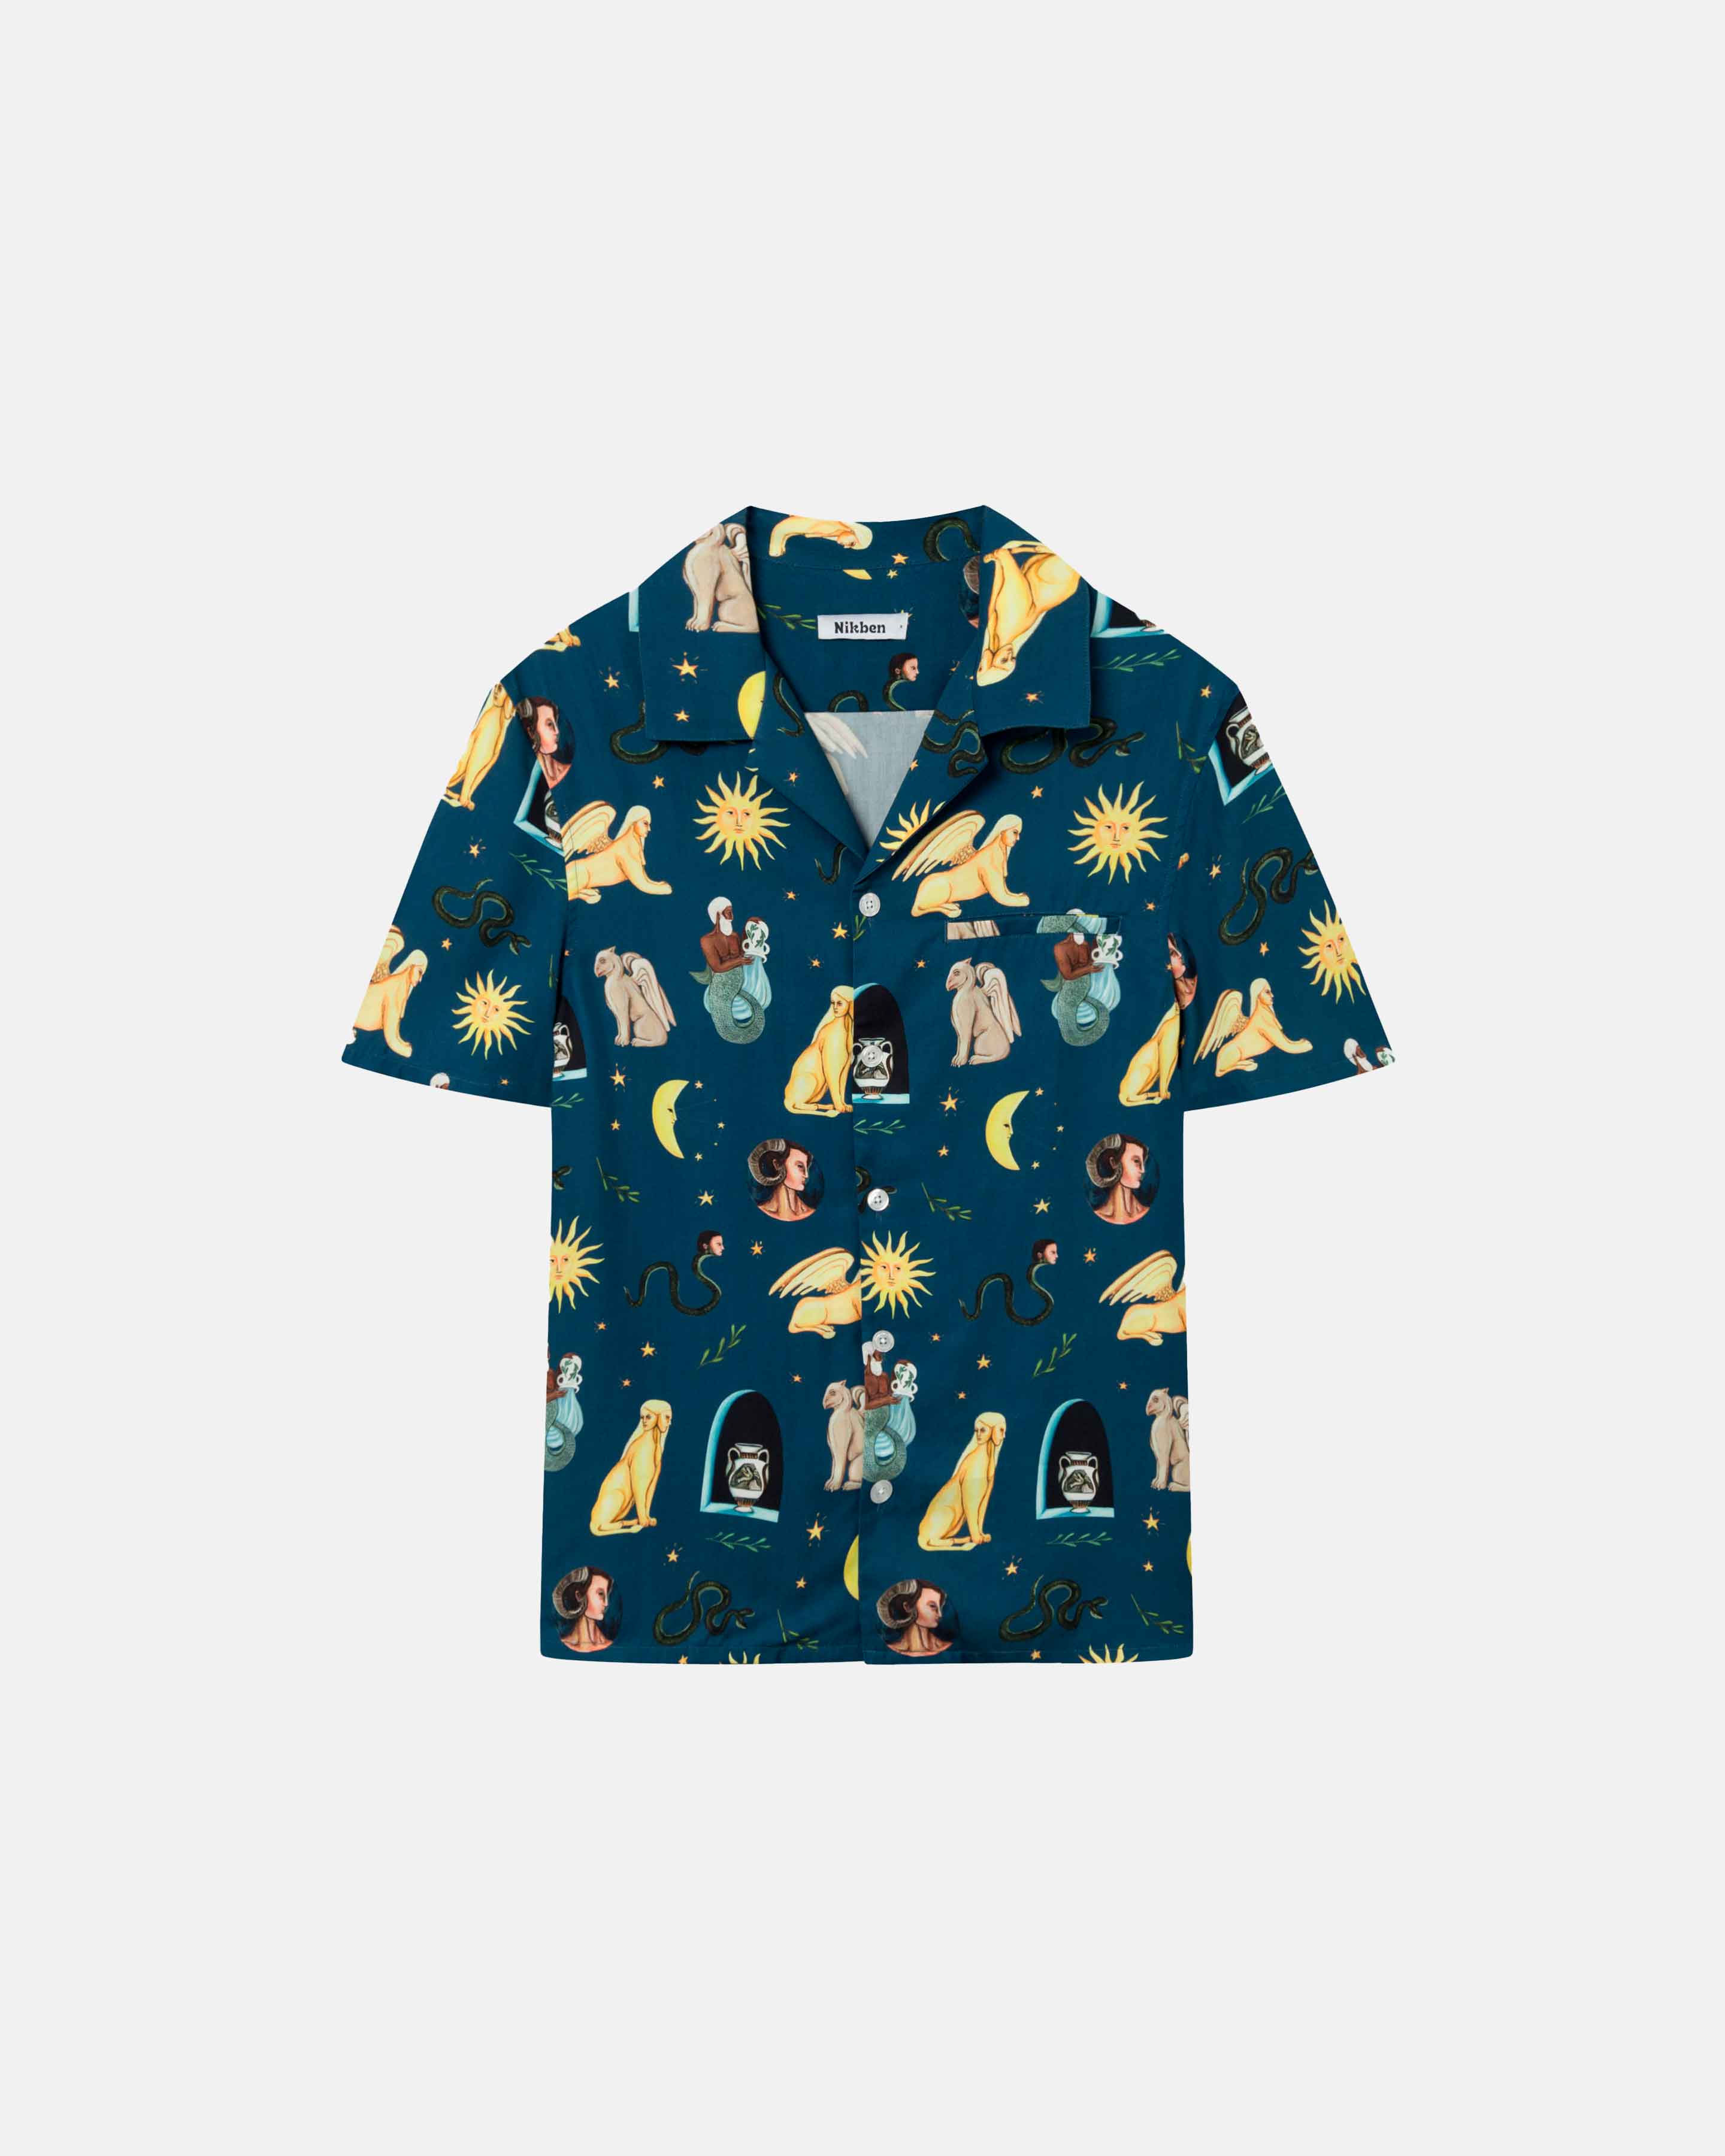 Navy short-sleeved vacation shirt with a multi-colored graphic pattern, open collar, one breast pocket, and button closure.